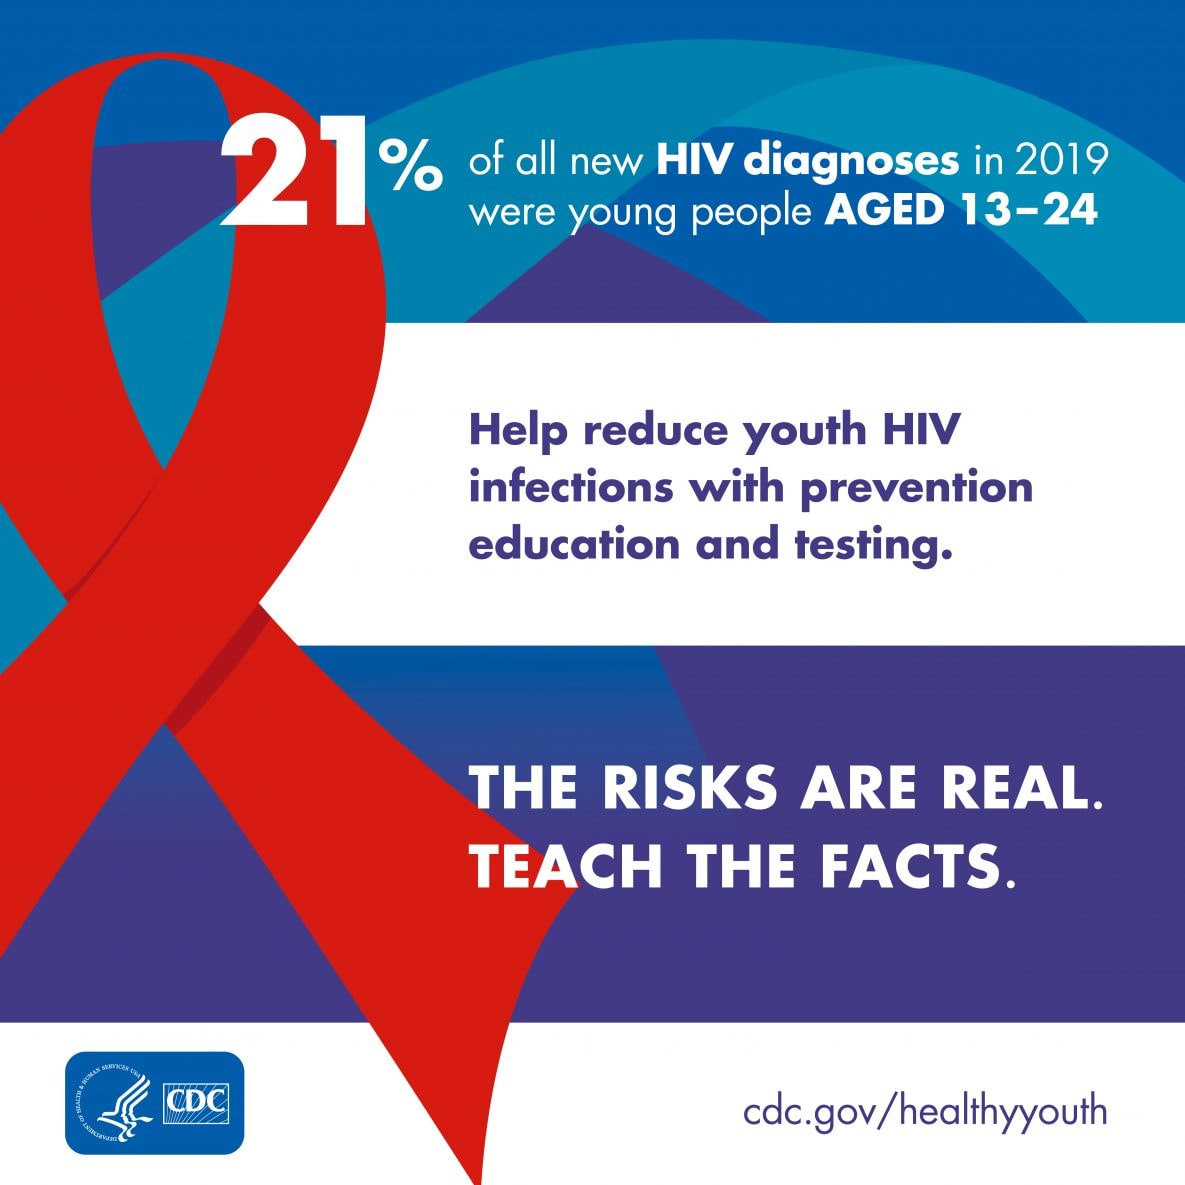 Quality health education is critical for students to learn the information and skills to prevent HIV and other STDs